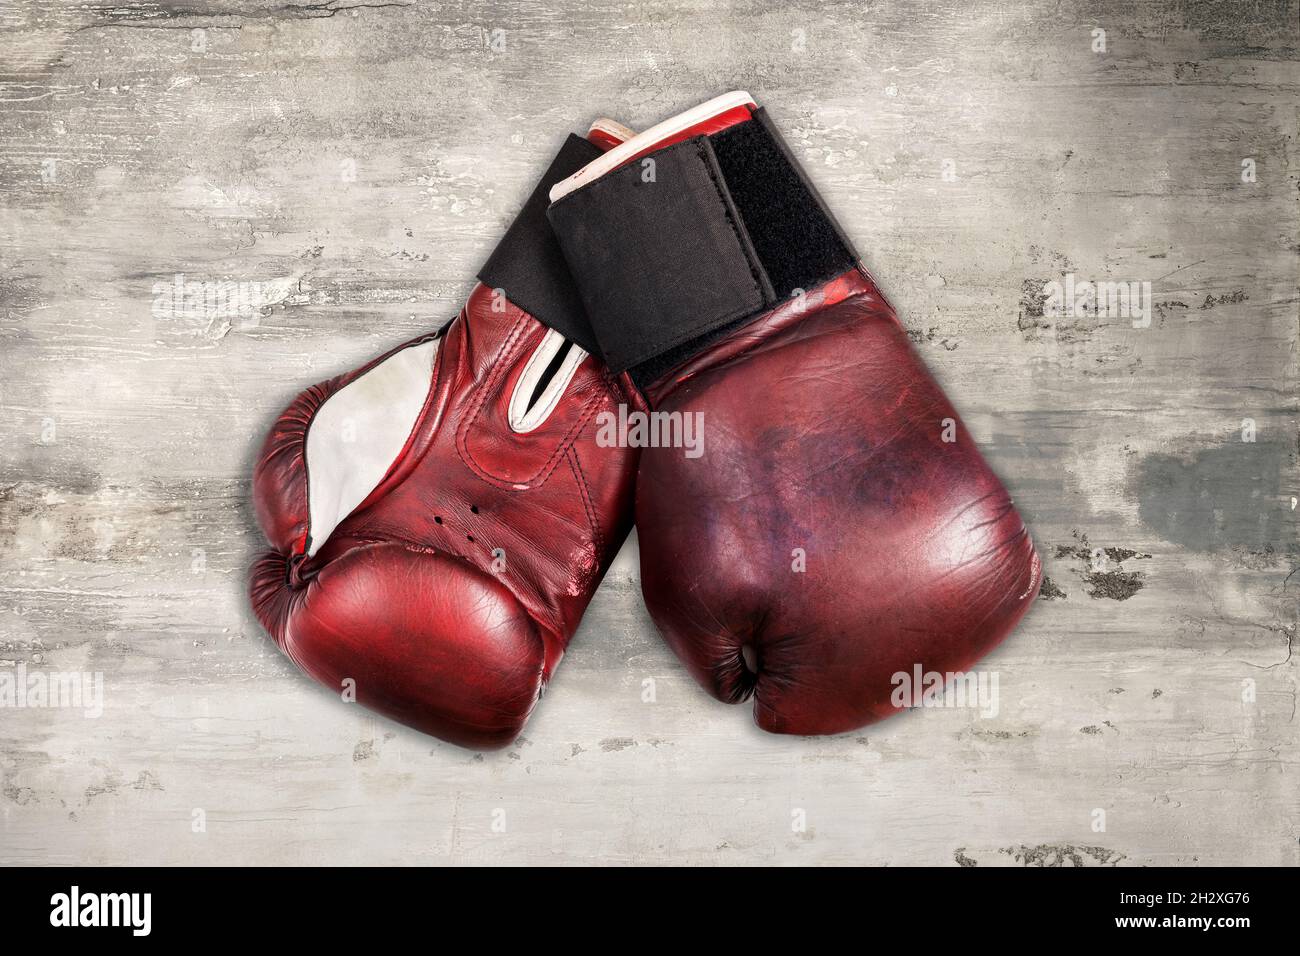 From above of pair of old red leather boxing gloves placed on shabby gray wooden background Stock Photo